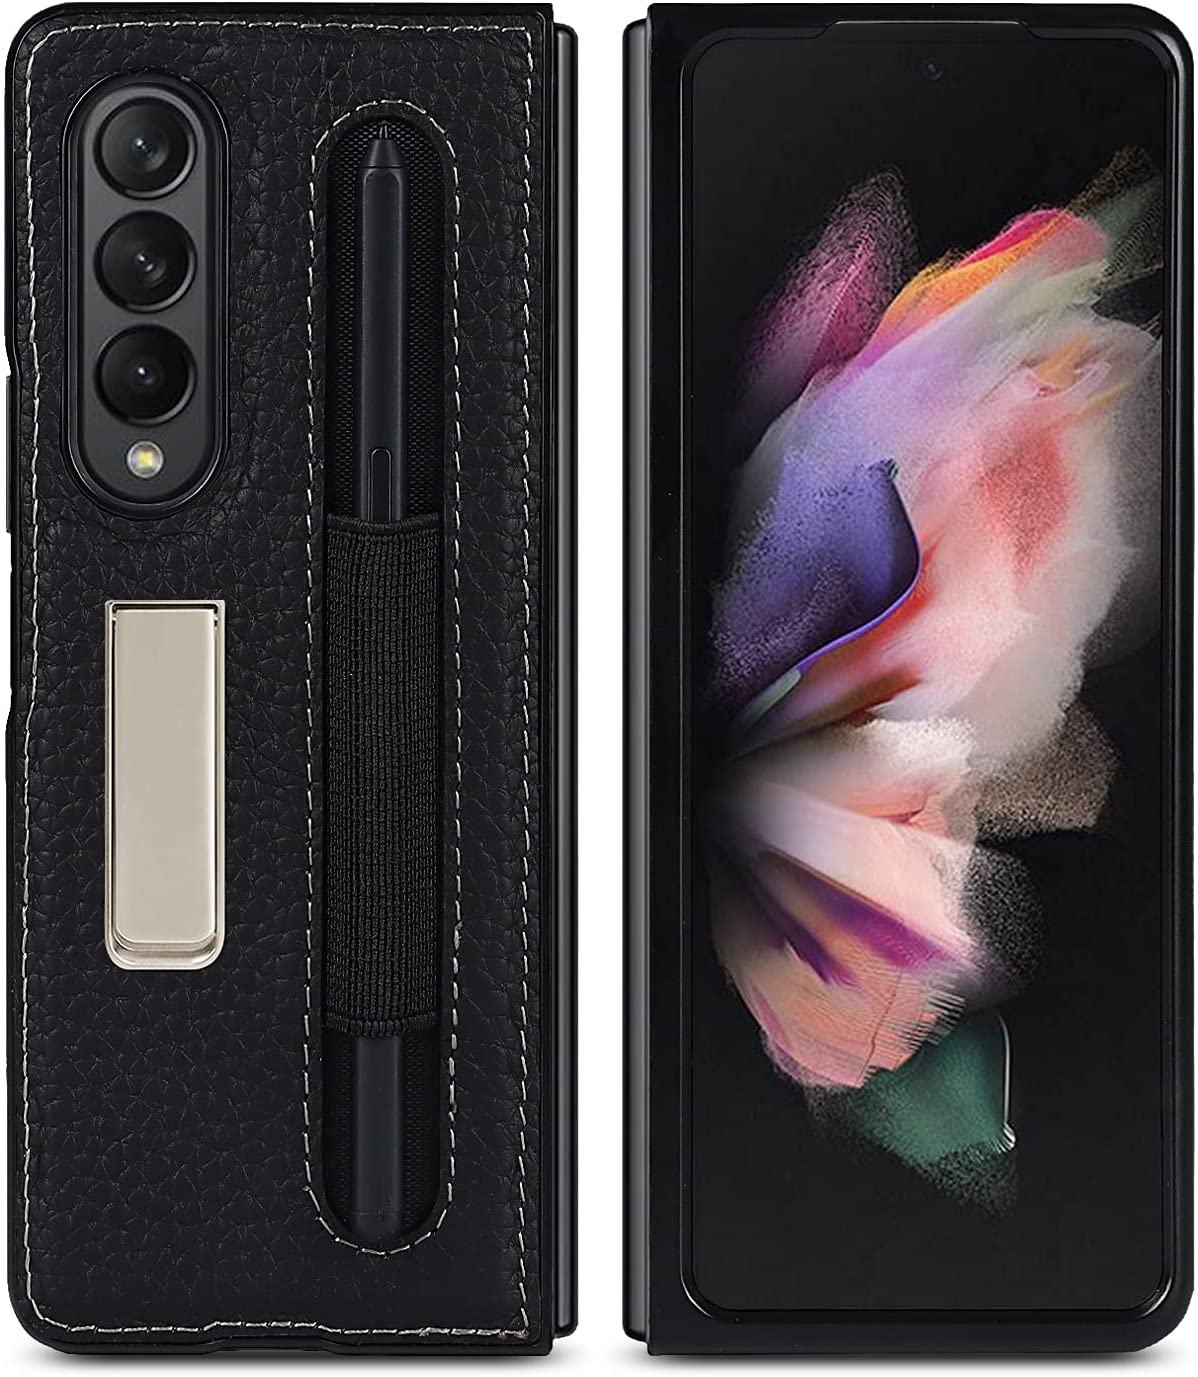 samsung z fold3 mobile phone case galaxy fold 3 5g with spen pen case holder protective coverfvv9w